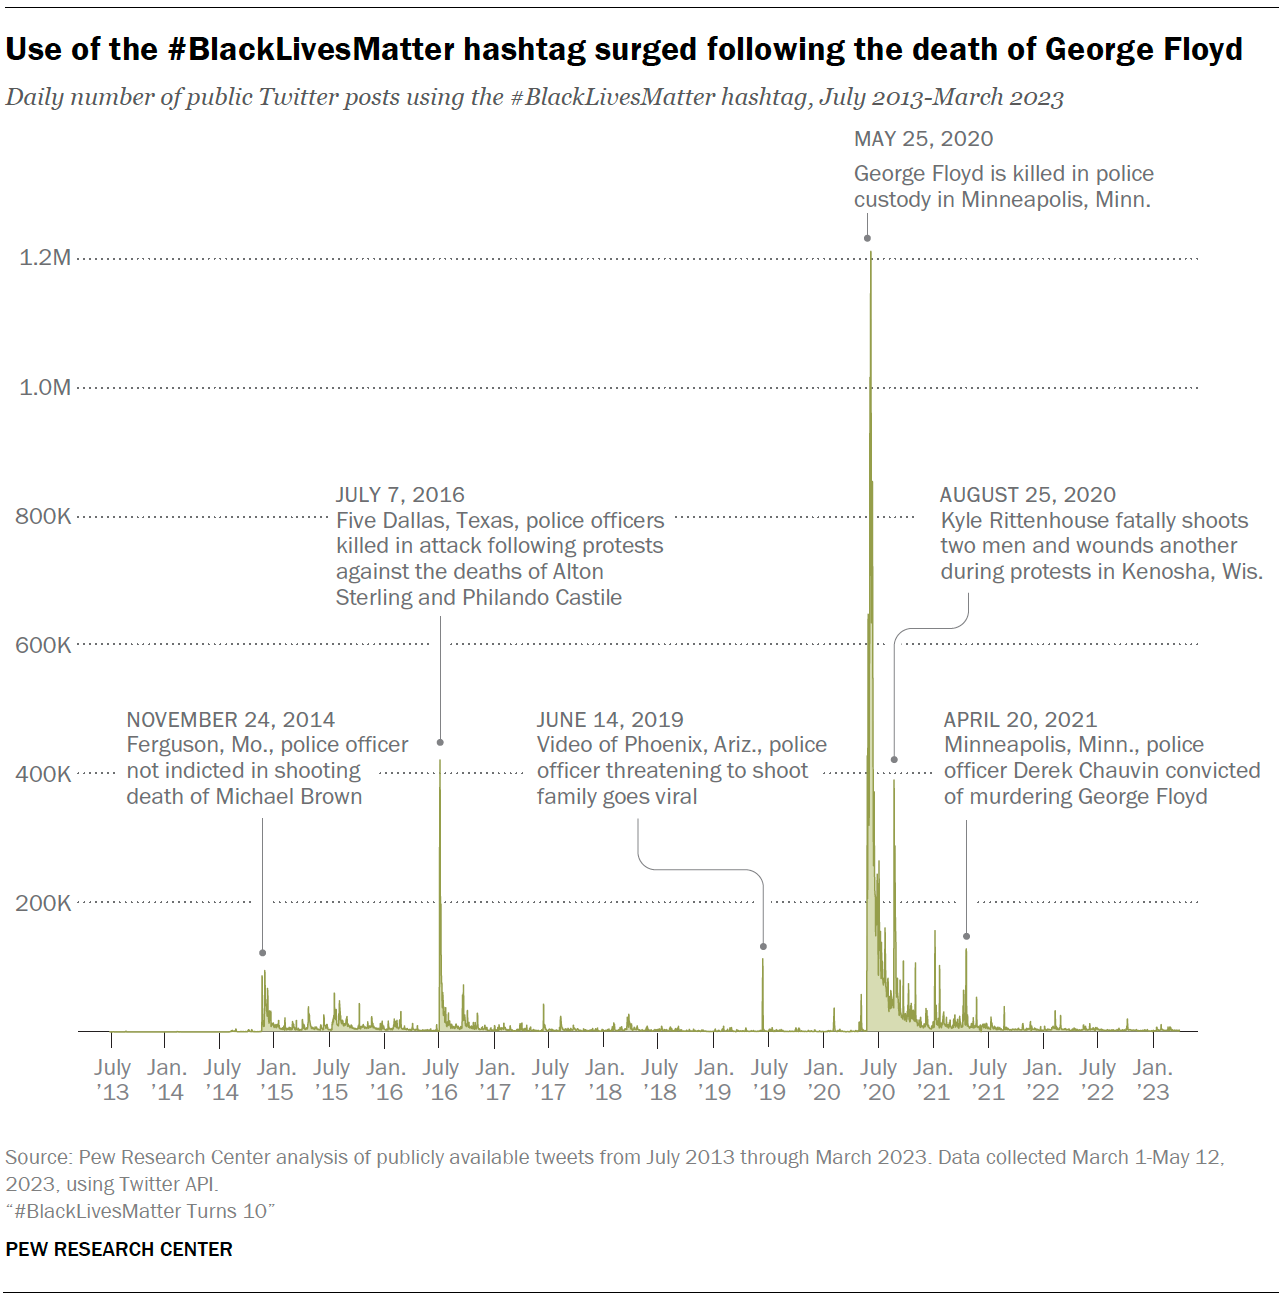 A chart showing that the Use of the #BlackLivesMatter hashtag surged following the death of George Floyd